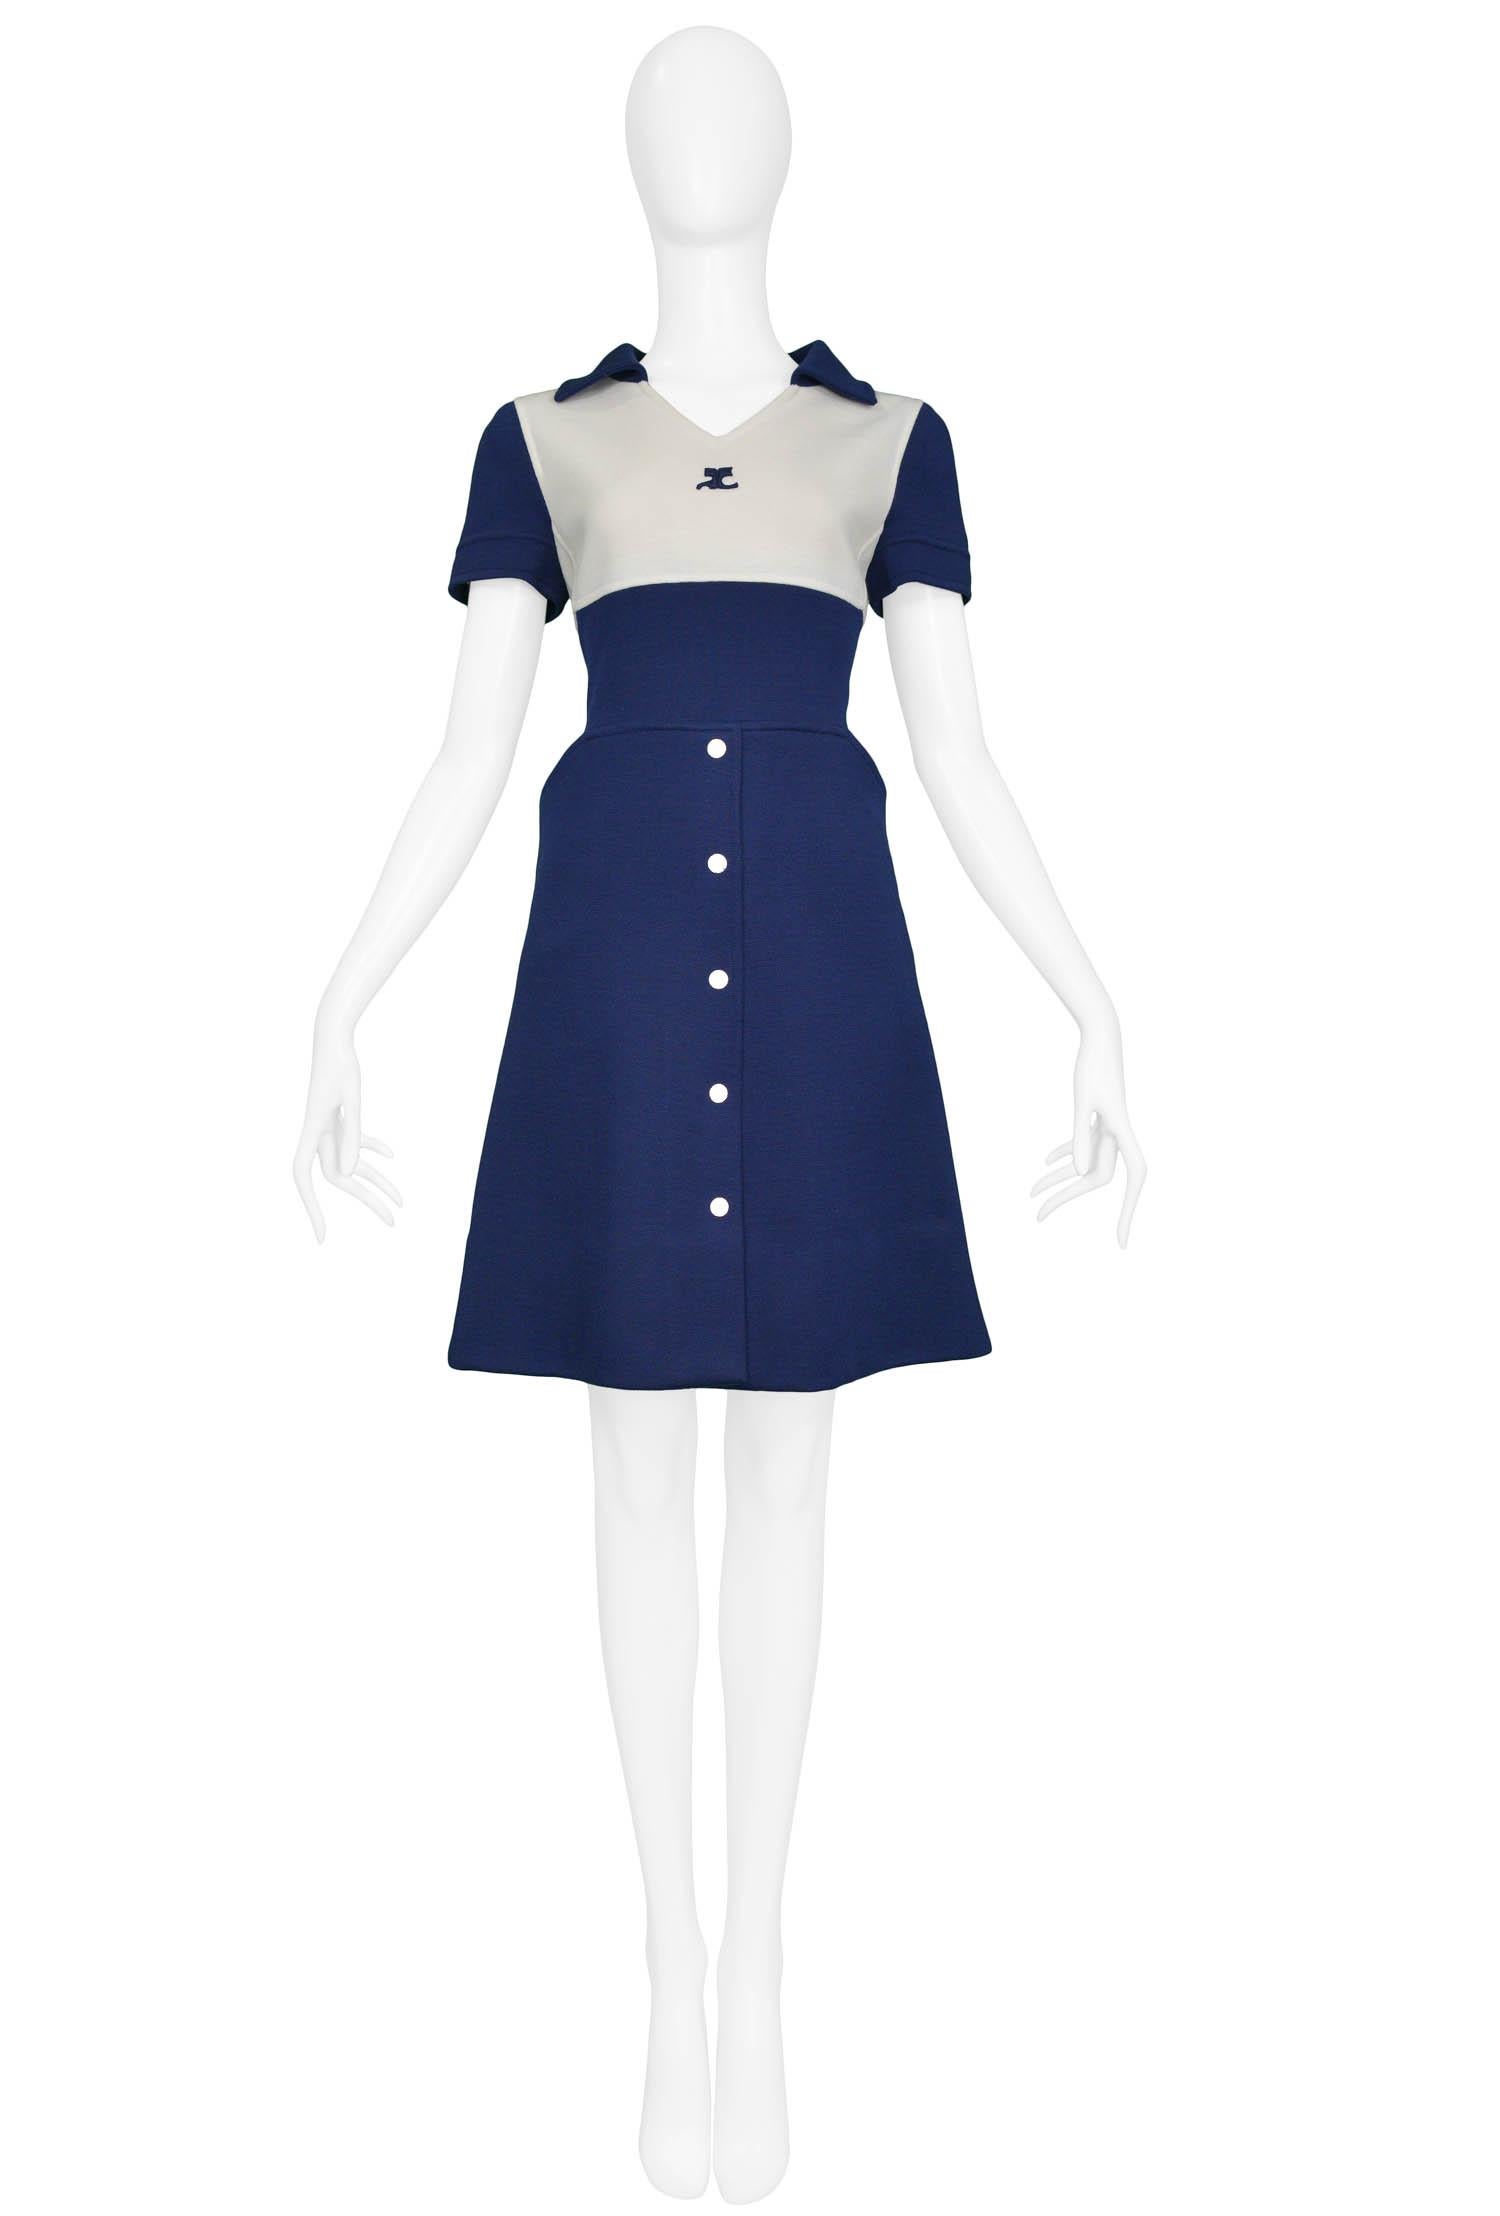 Vintage André Courrèges blue short sleeve wool dress with white yoke featuring the Courrèges iconic logo at the neck and white buttons up the front of the skirt as well as along the center back of the dress.

Excellent Condition.

Size: 4 